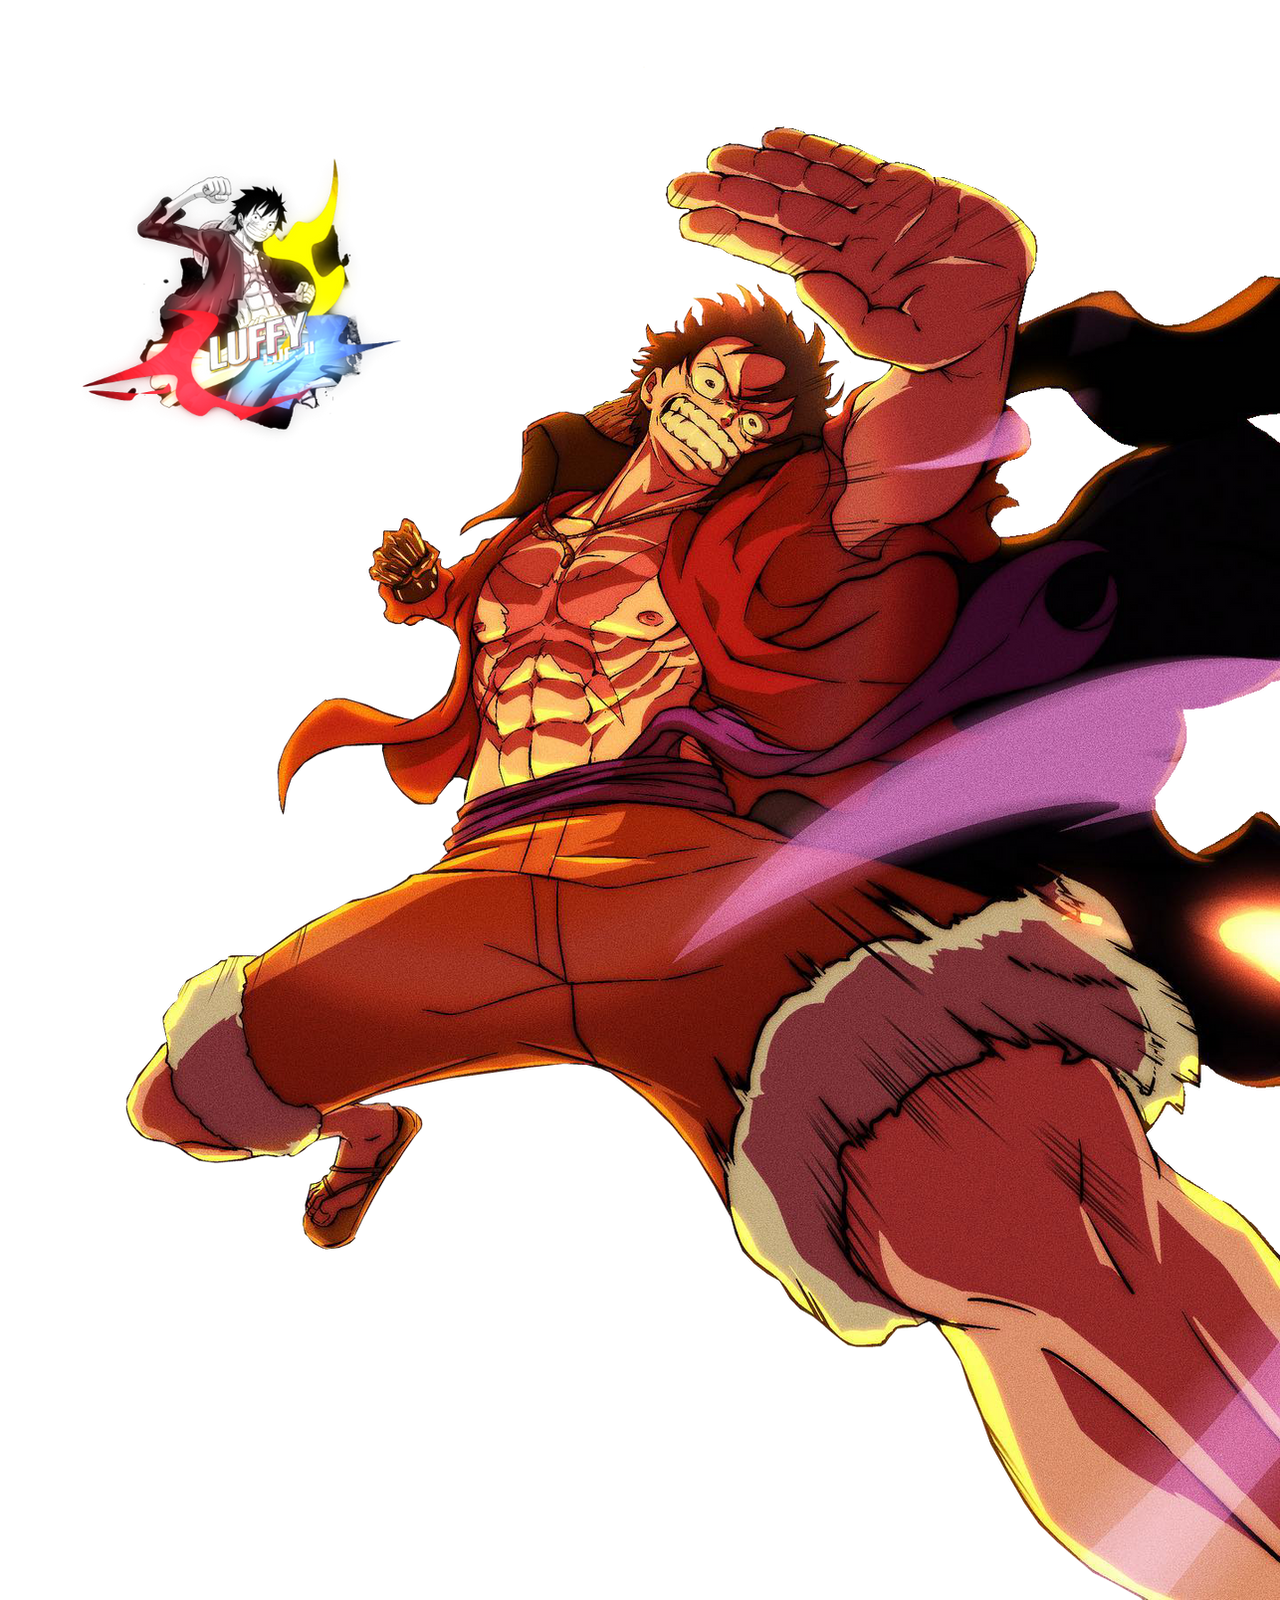 One Piece Monkey D. Luffy Png by bloomsama on DeviantArt